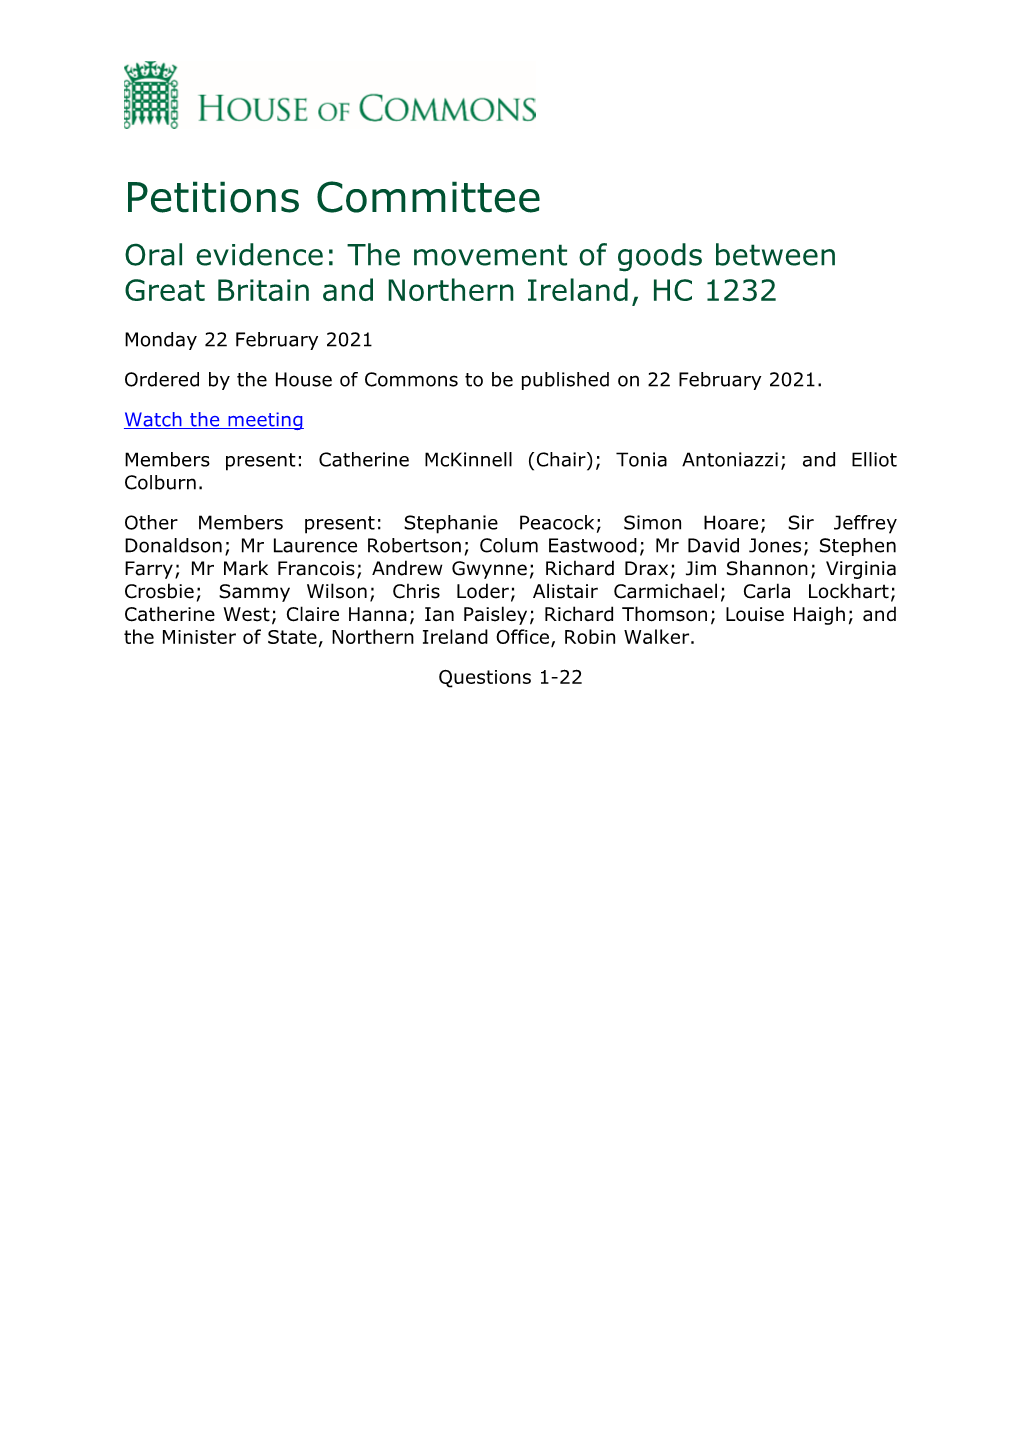 Petitions Committee Oral Evidence: the Movement of Goods Between Great Britain and Northern Ireland, HC 1232